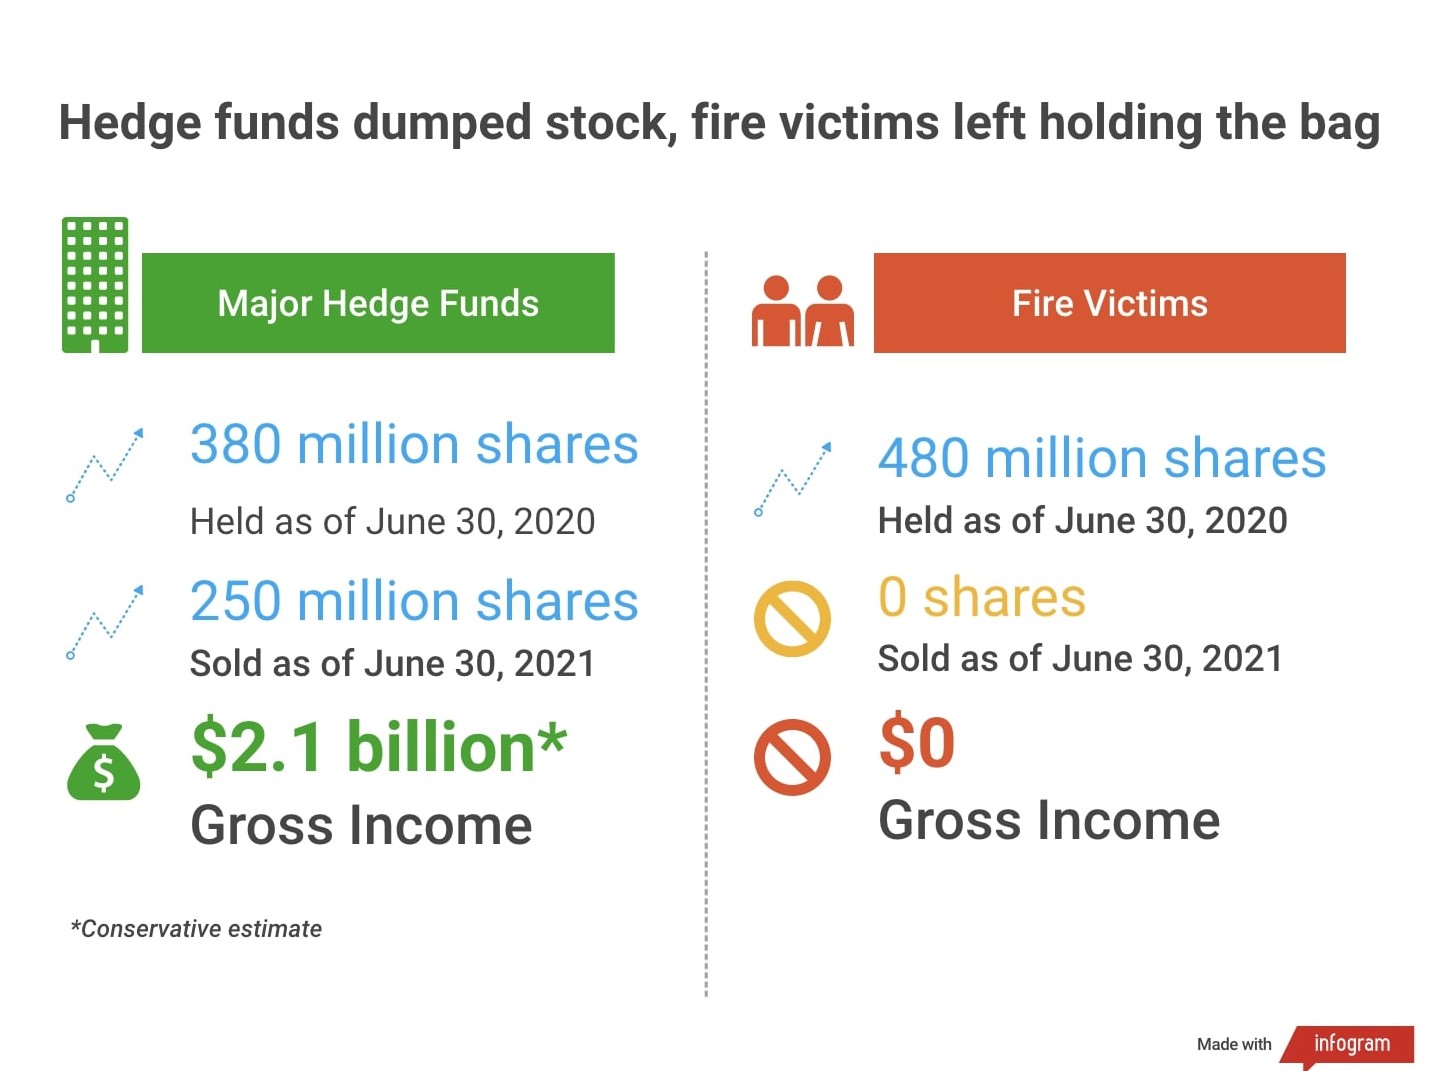 A graphic describes statistics for hedge funds that profited $2.1 billion in gross income while fire victims had $0 in gross income. Hedge funds sold 250 million shares of PG&E whereas fire victims kept 480 million shares. 